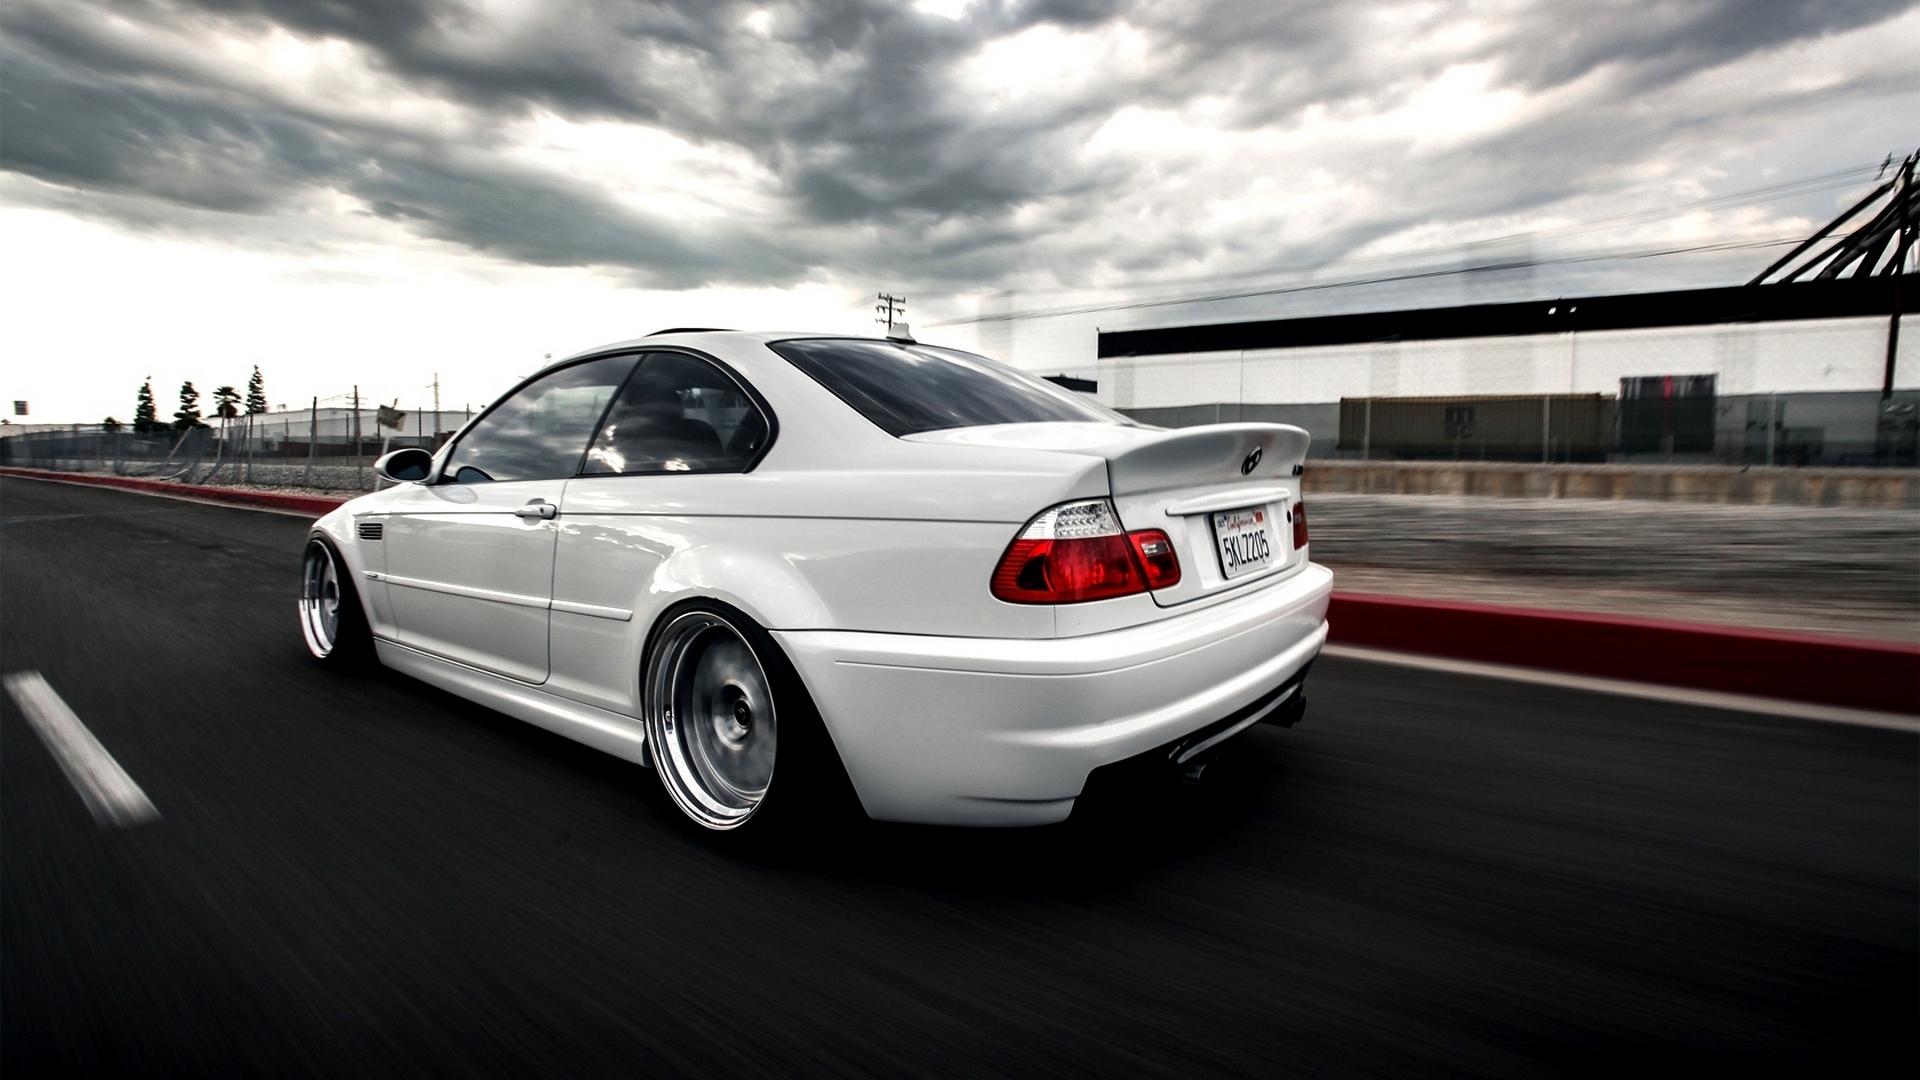 Wallapapers Bmw M3 E46 Stance Speed Car Wallpaper